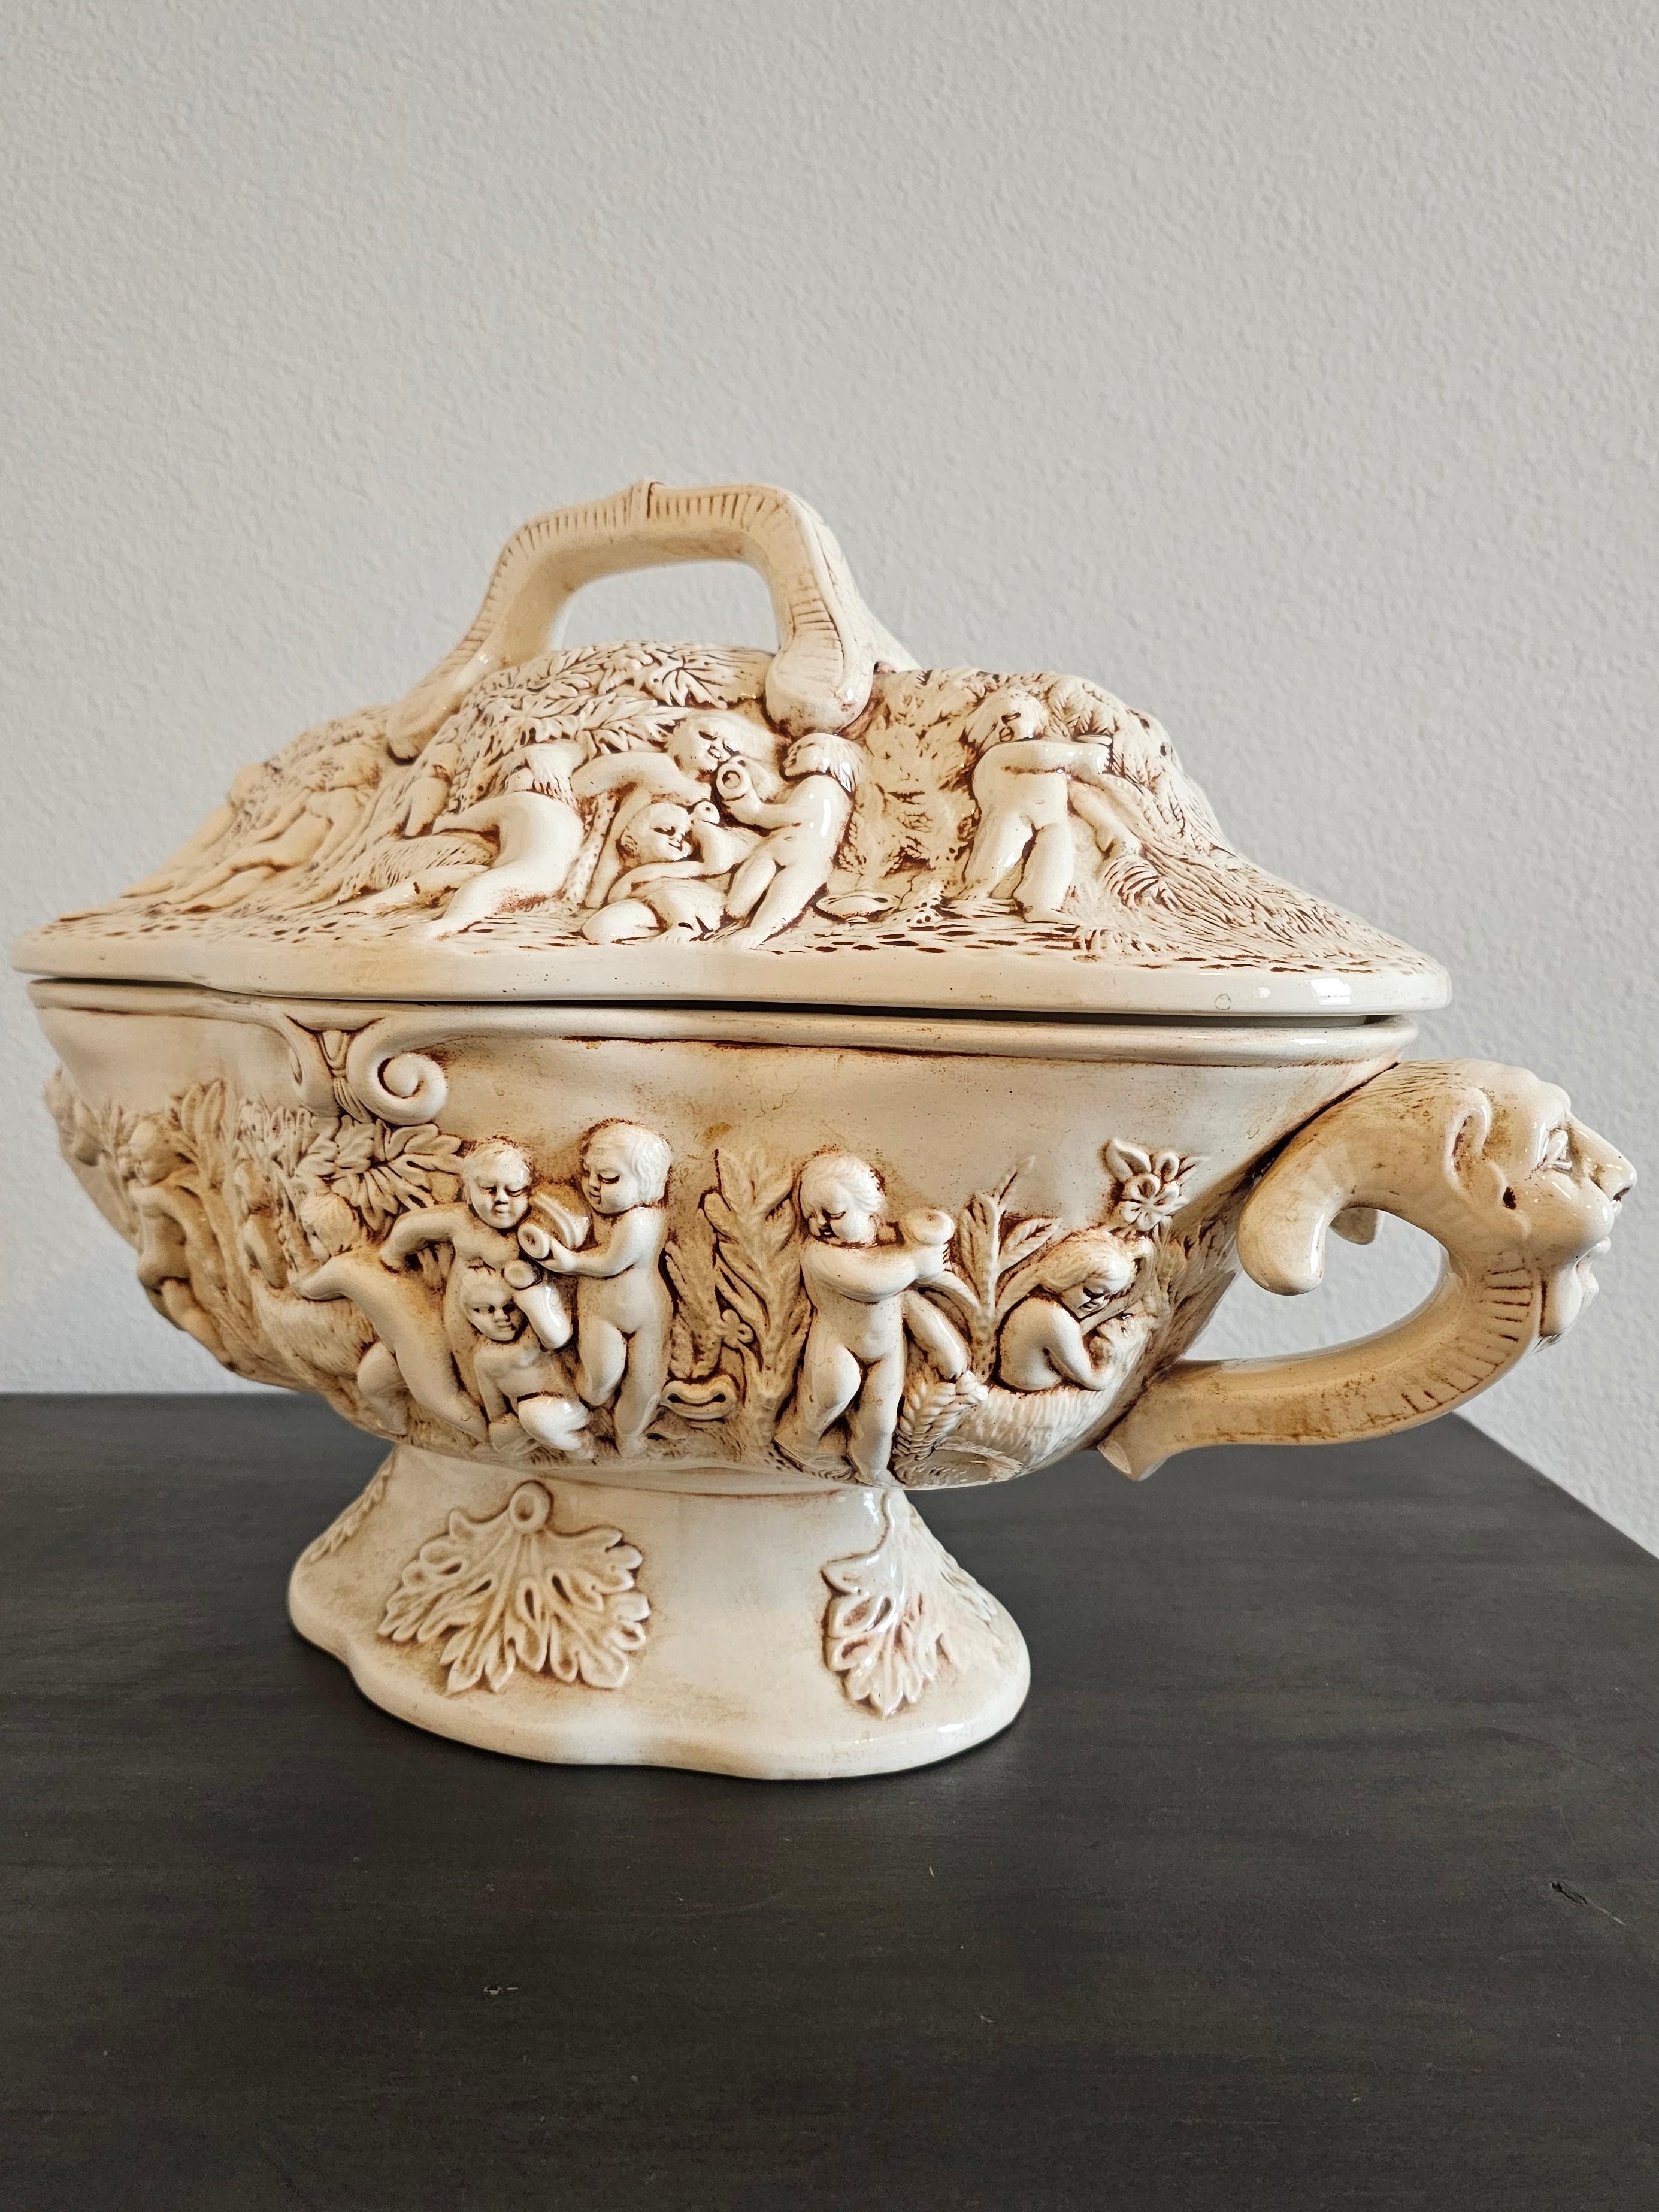 Vintage Italian Capodimonte Porcelain Covered Serving Dish Large Soup Tureen For Sale 2